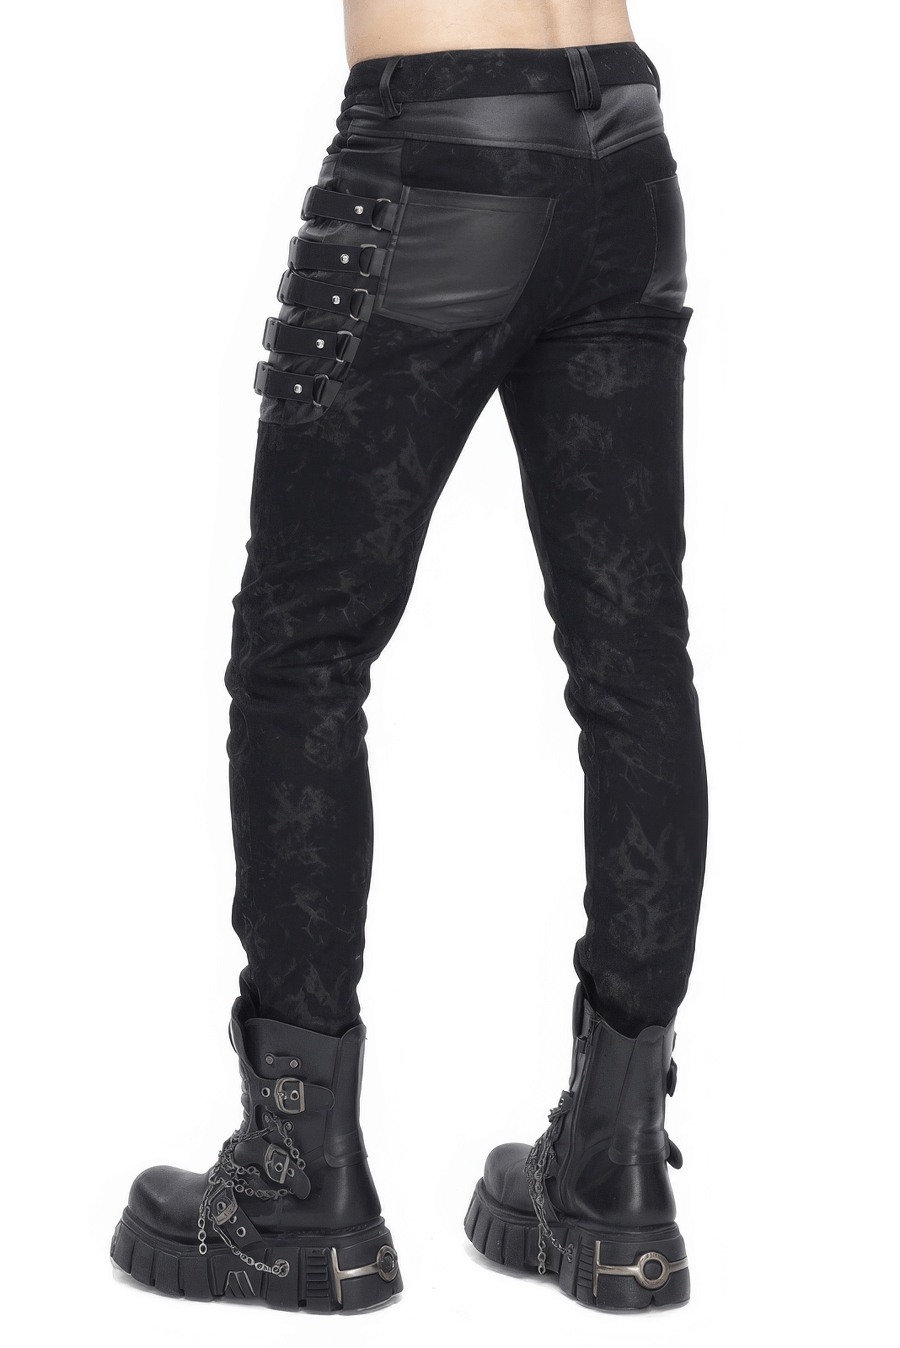 Gothic Style Black Buckled and Strapped Trousers for Men